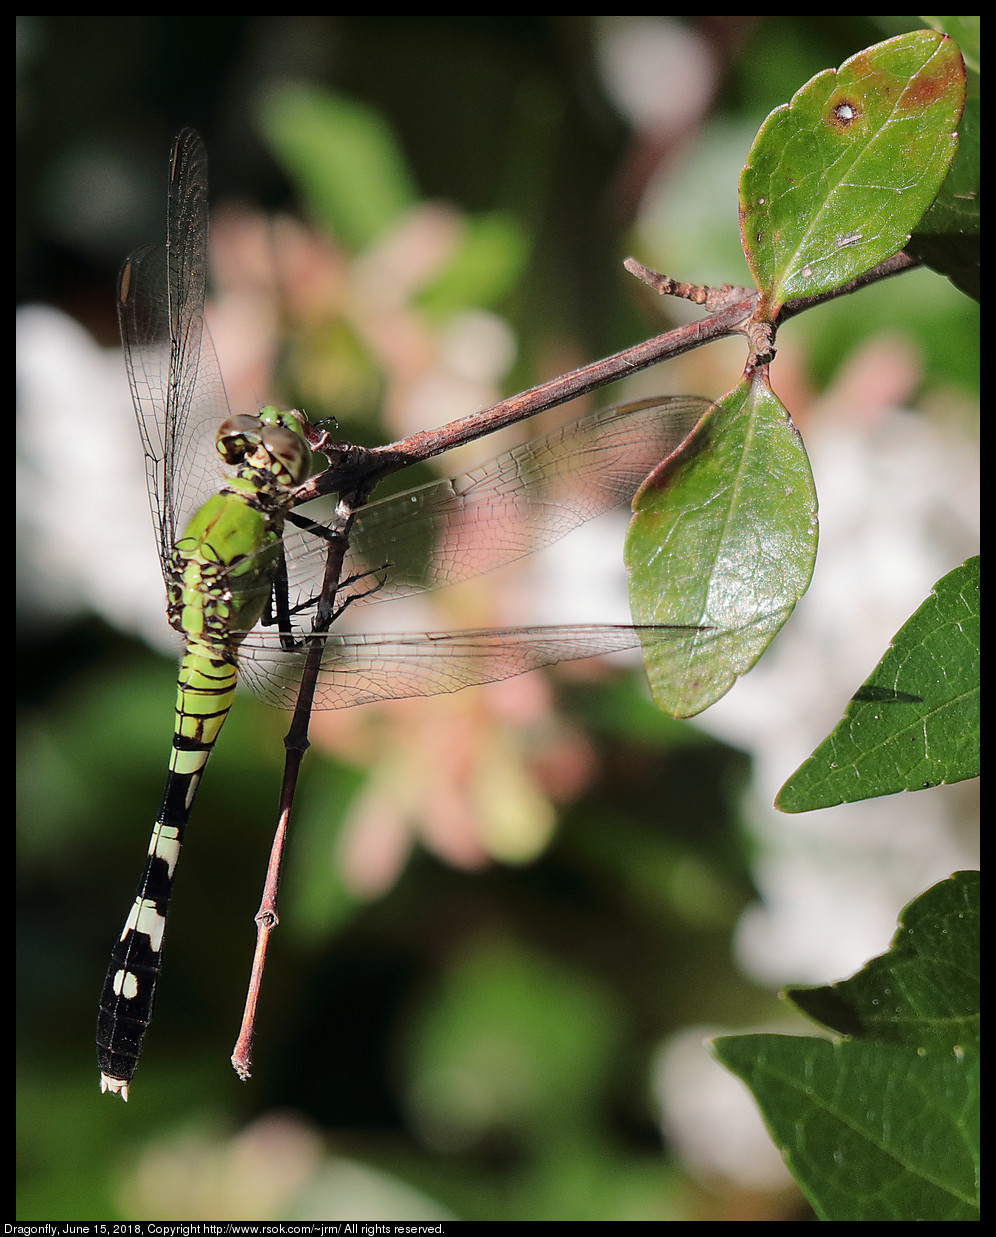 Dragonfly, June 15, 2018